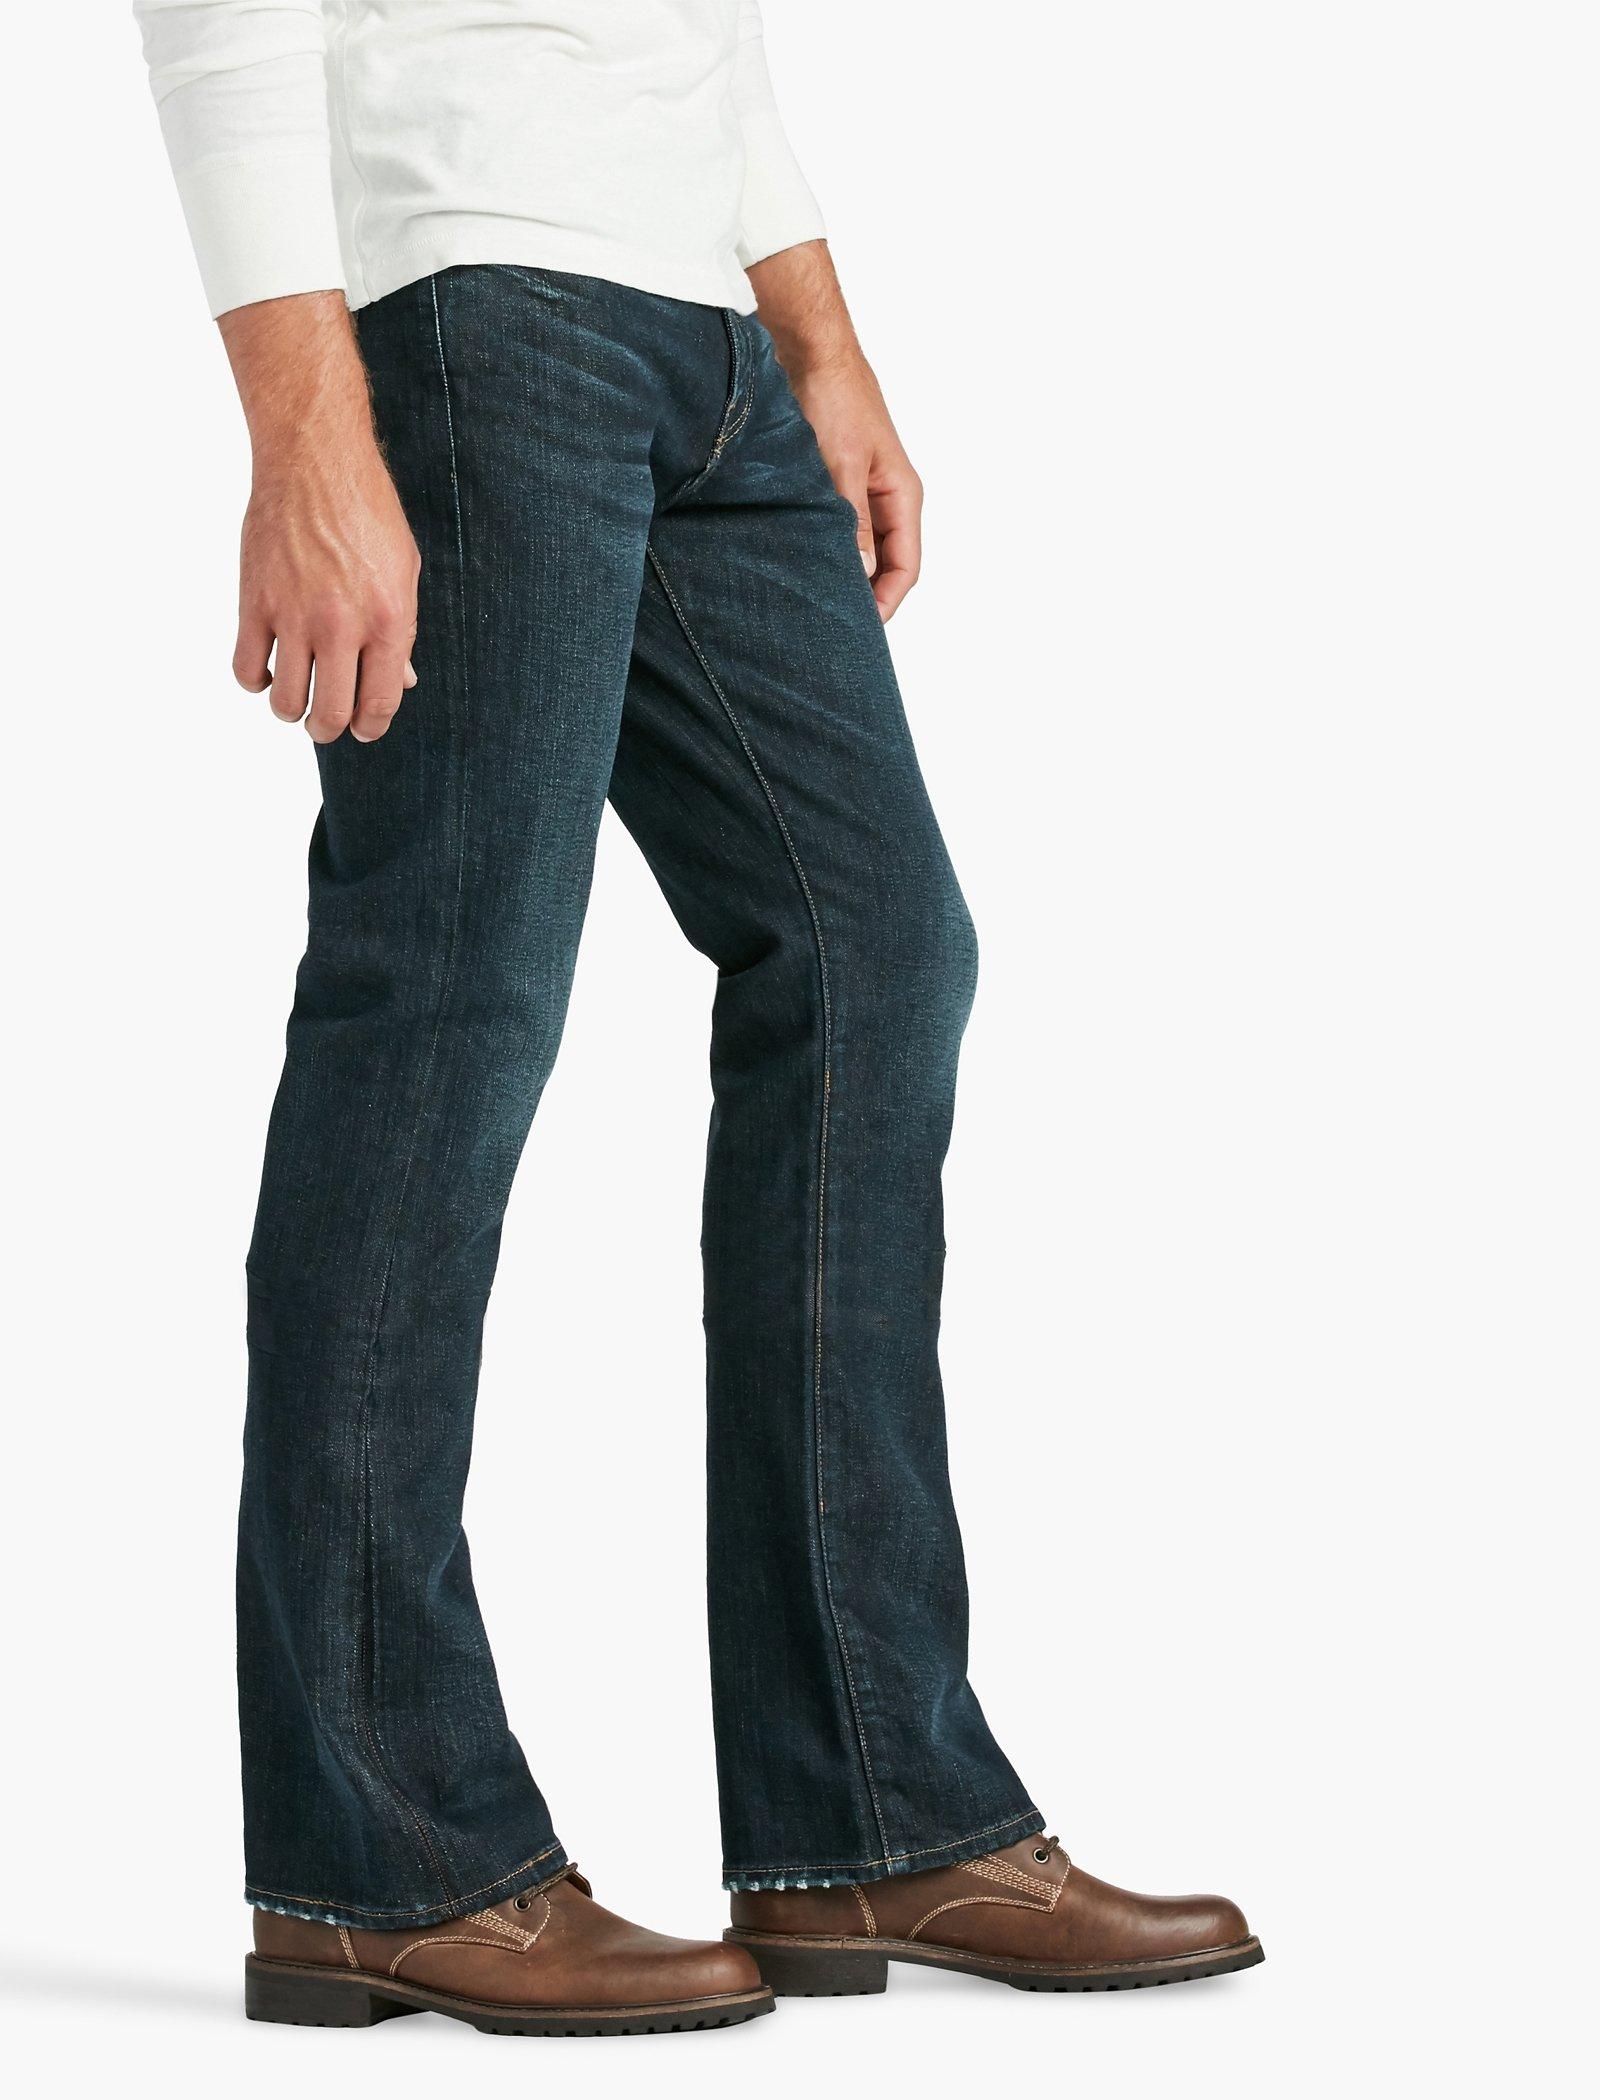 lucky jeans mens bootcut